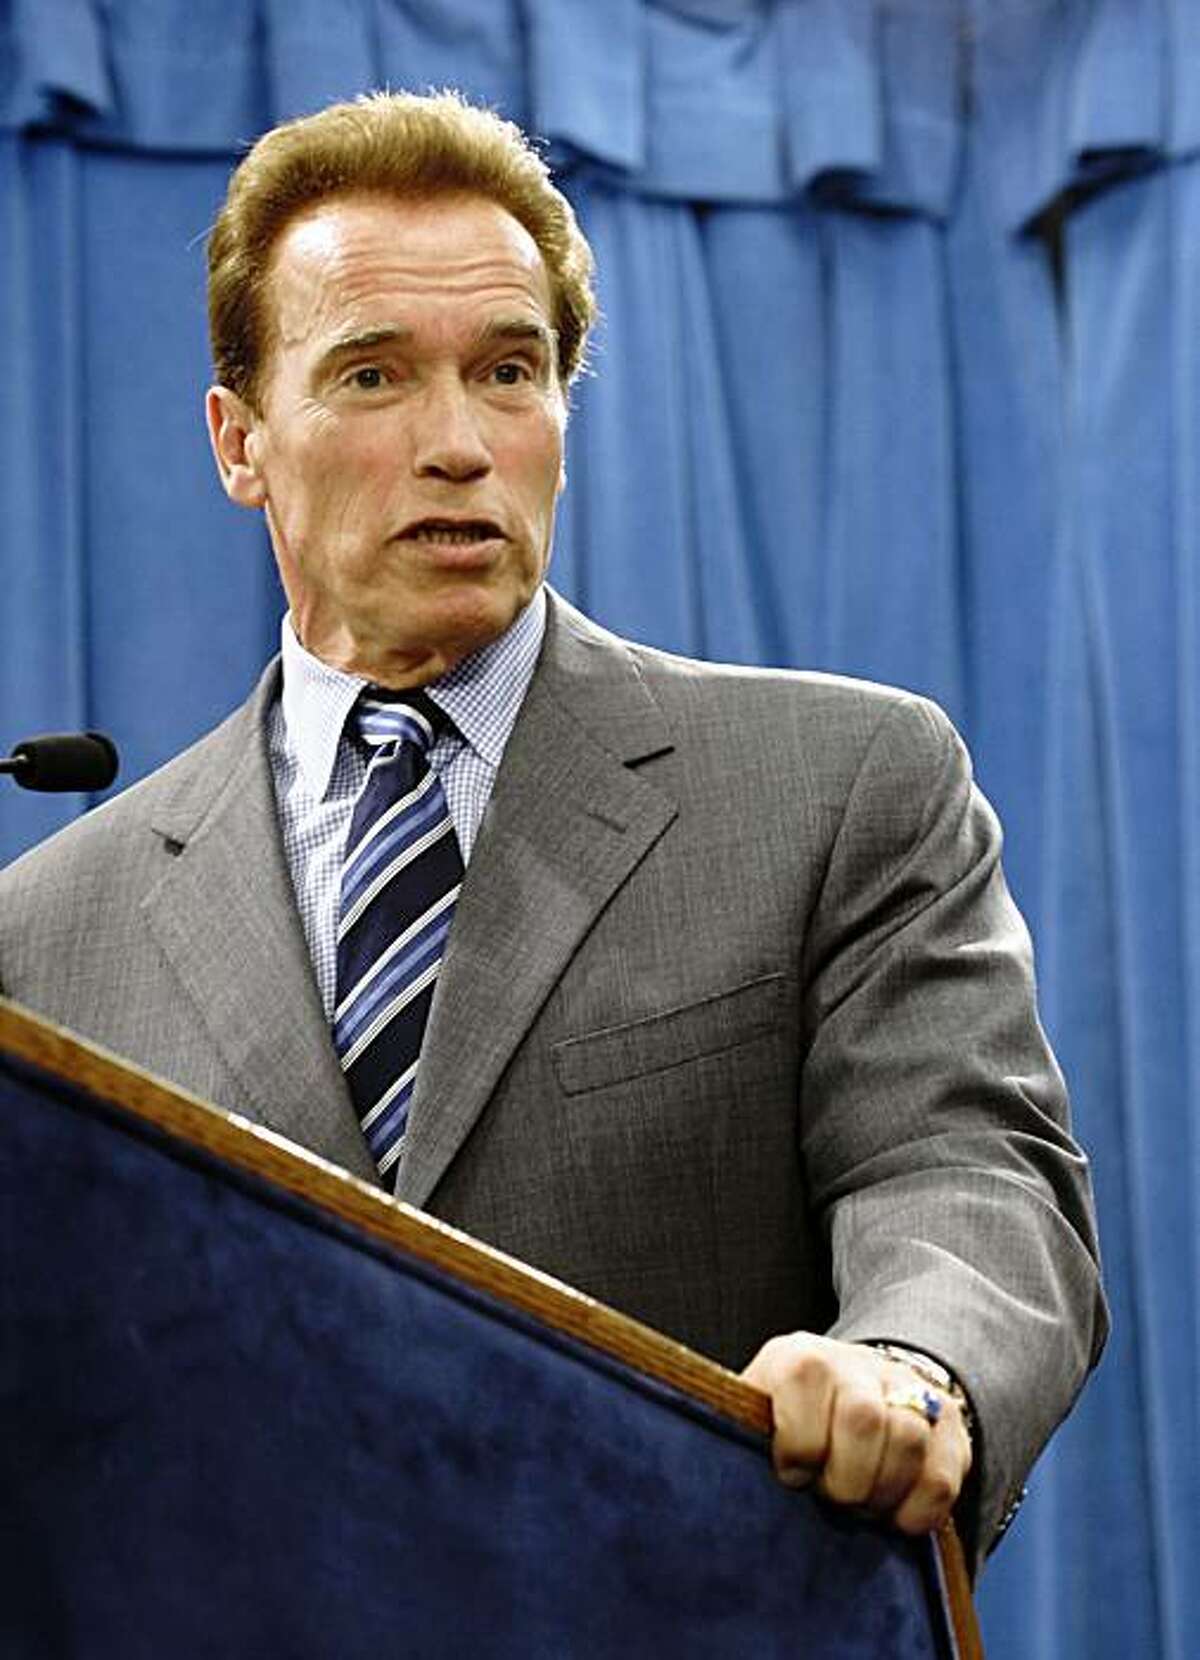 Gov. Arnold Schwarzenegger answers a reporter's question concerning the recommendation by the Commission on the 21st Century Economy to overhaul California's tax system at the Capitol in Sacramento, Calif., Tuesday, Sept. 29, 2009. Schwarzenegger said he would call a special session of the Legislature to take up the commissions plan to change the state's tax system.(AP Photo/Rich Pedroncelli)